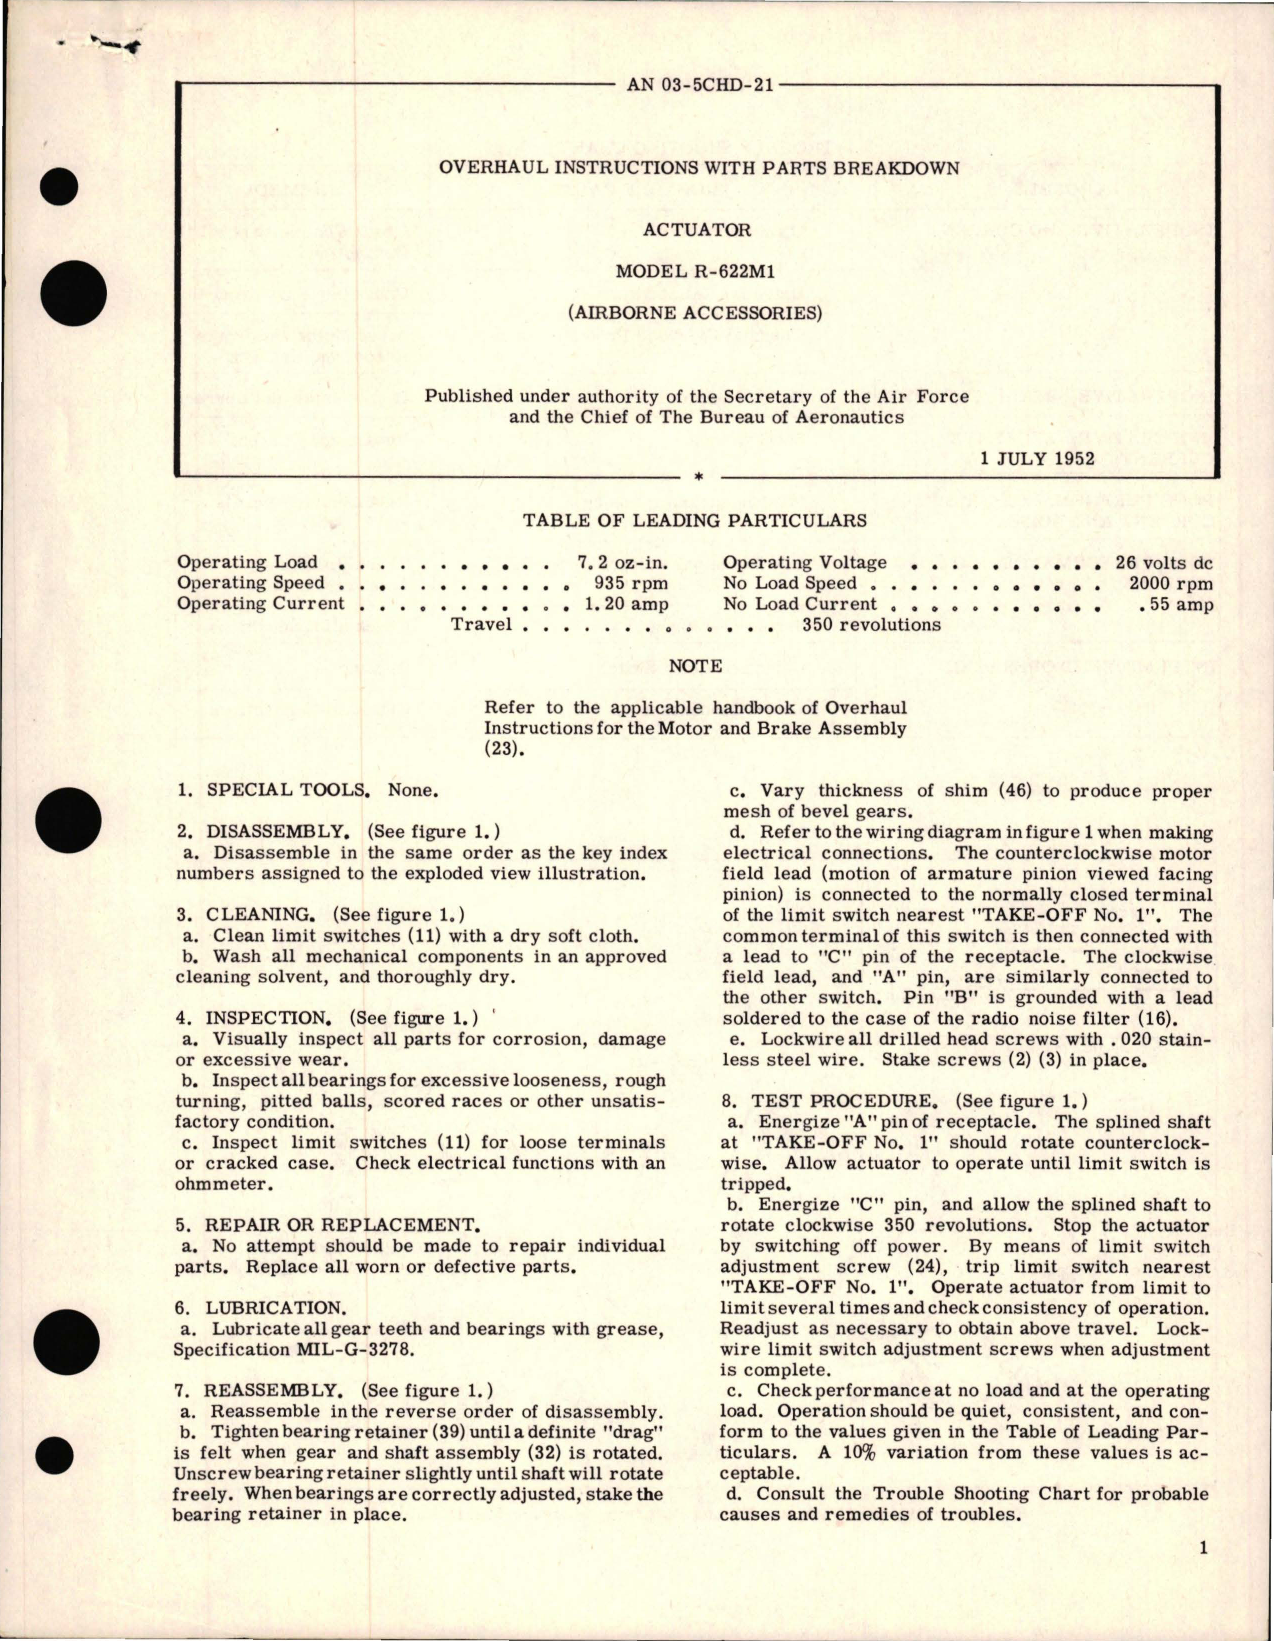 Sample page 1 from AirCorps Library document: Overhaul Instructions with Parts Breakdown for Actuator Model R-622M1